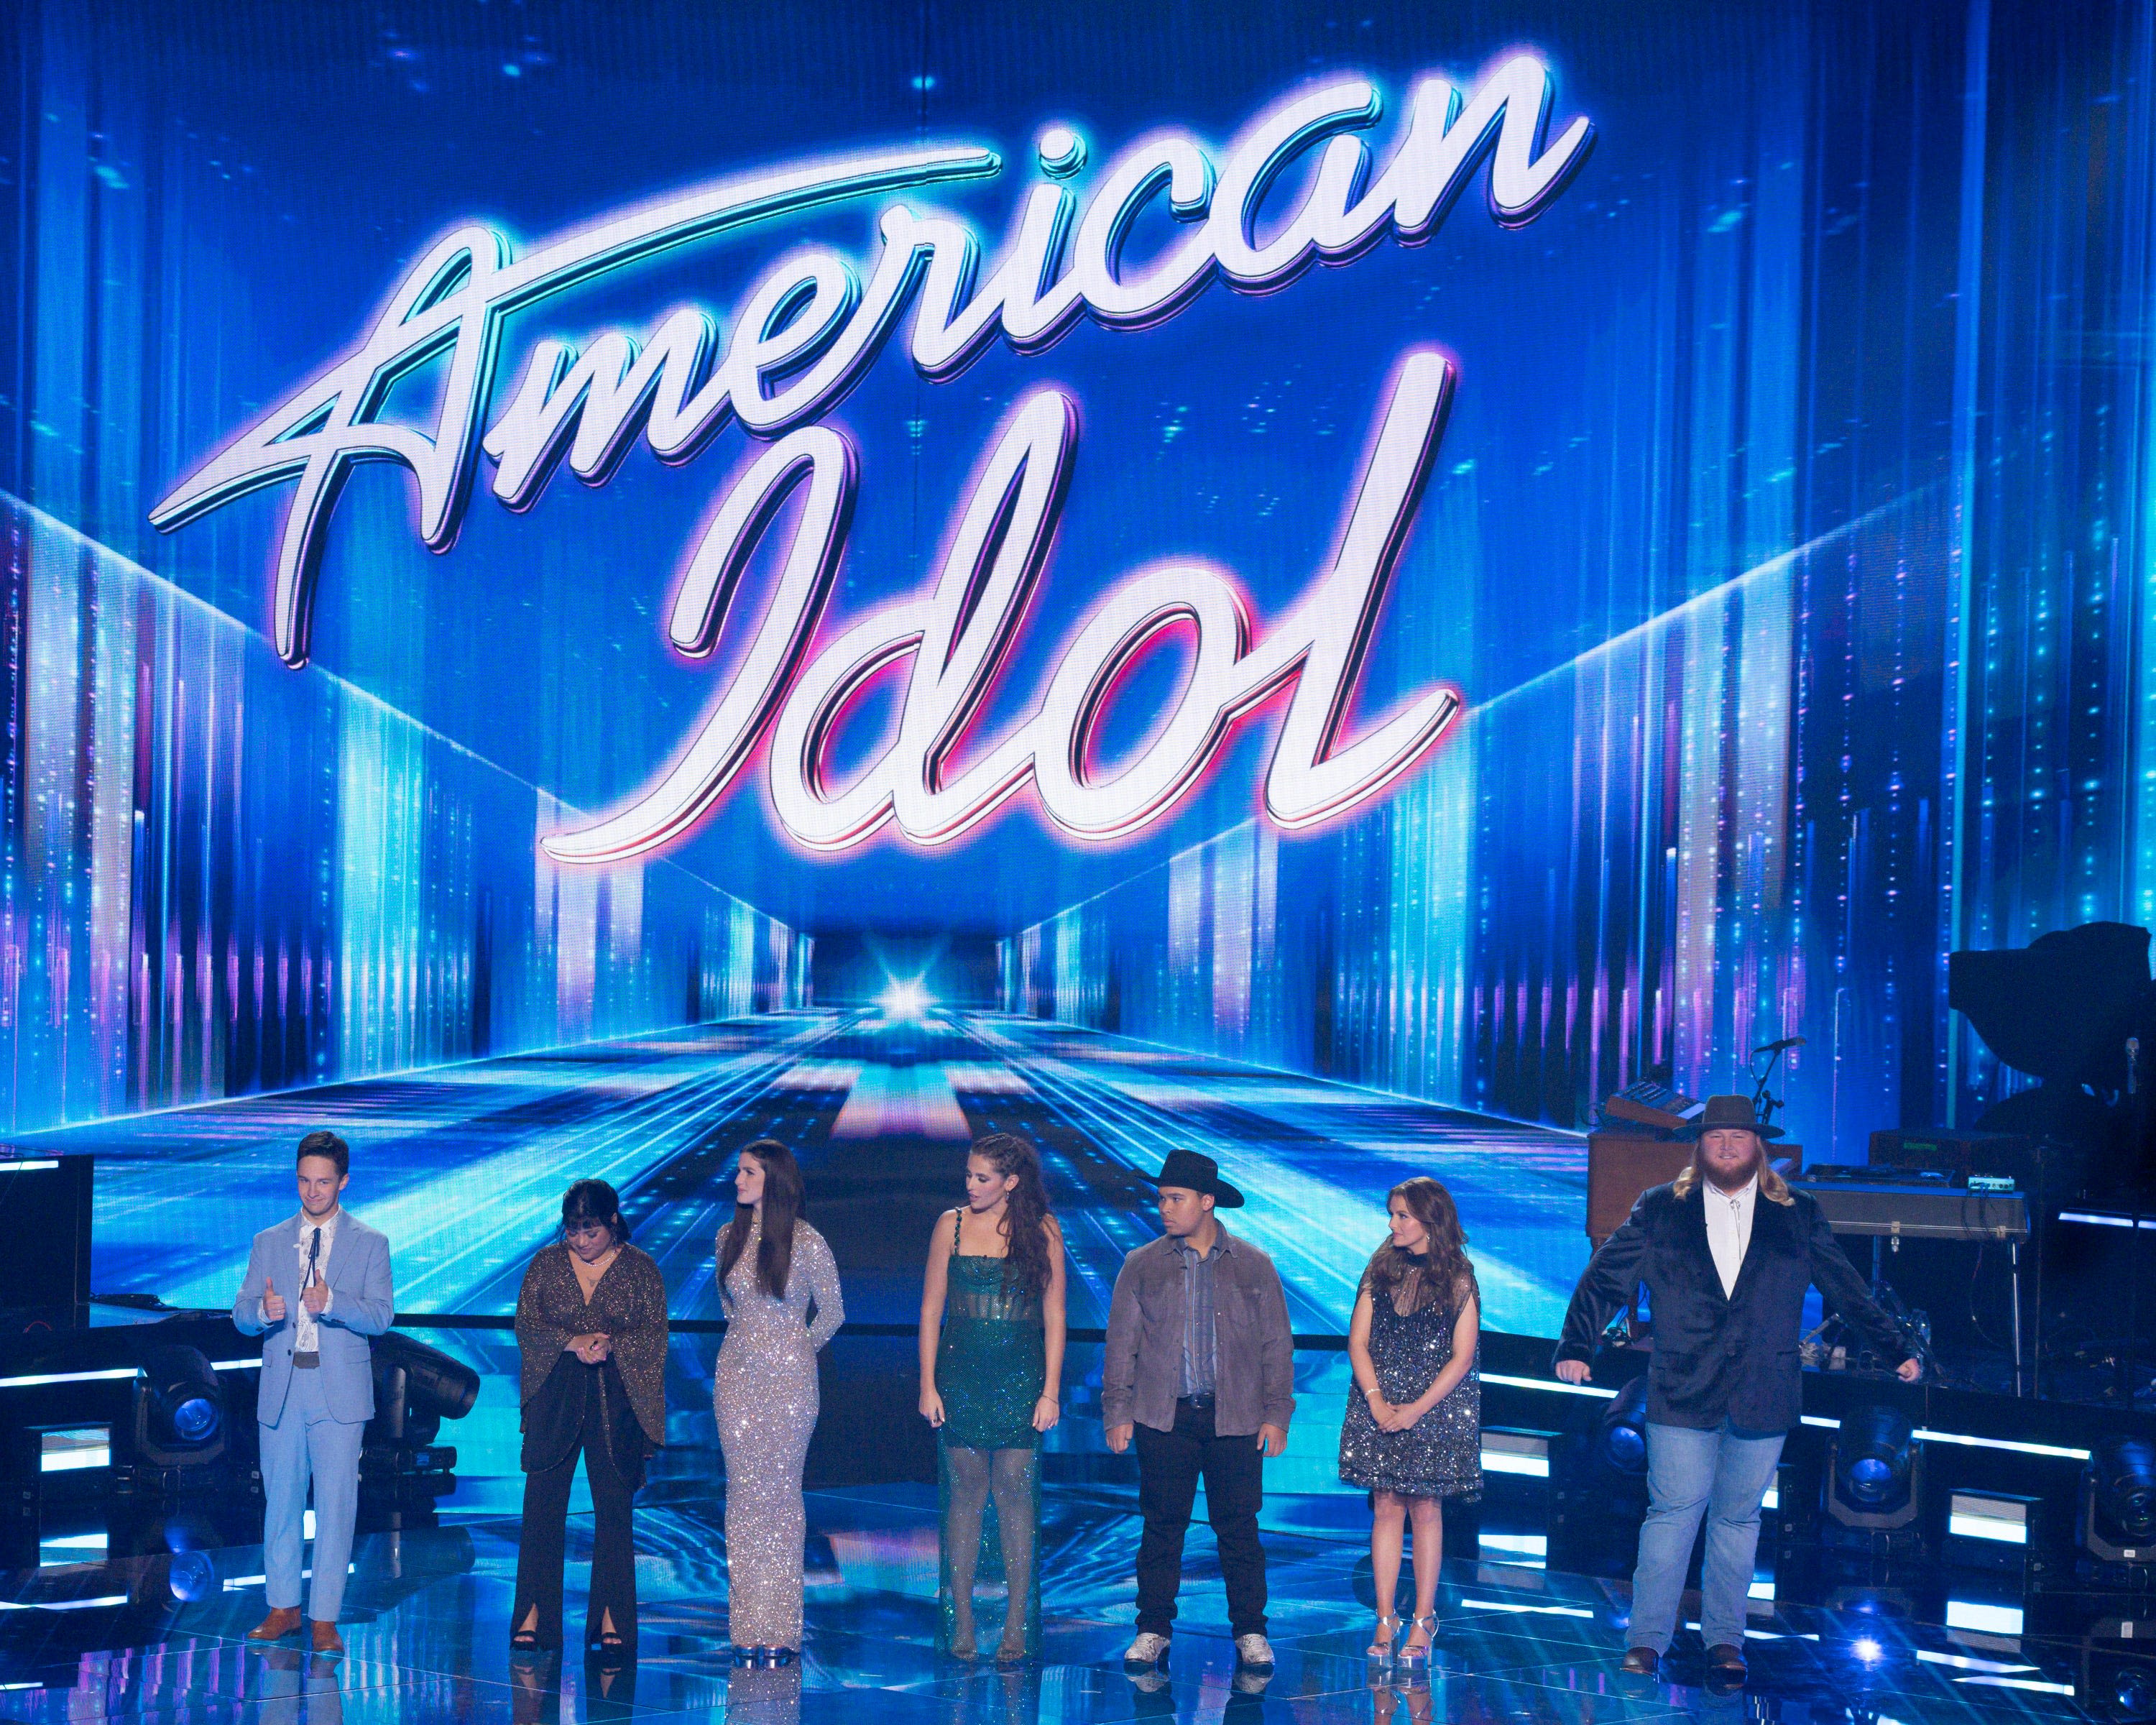 What time is 'American Idol' finale tonight? Top 3 contestants, guests, where to watch